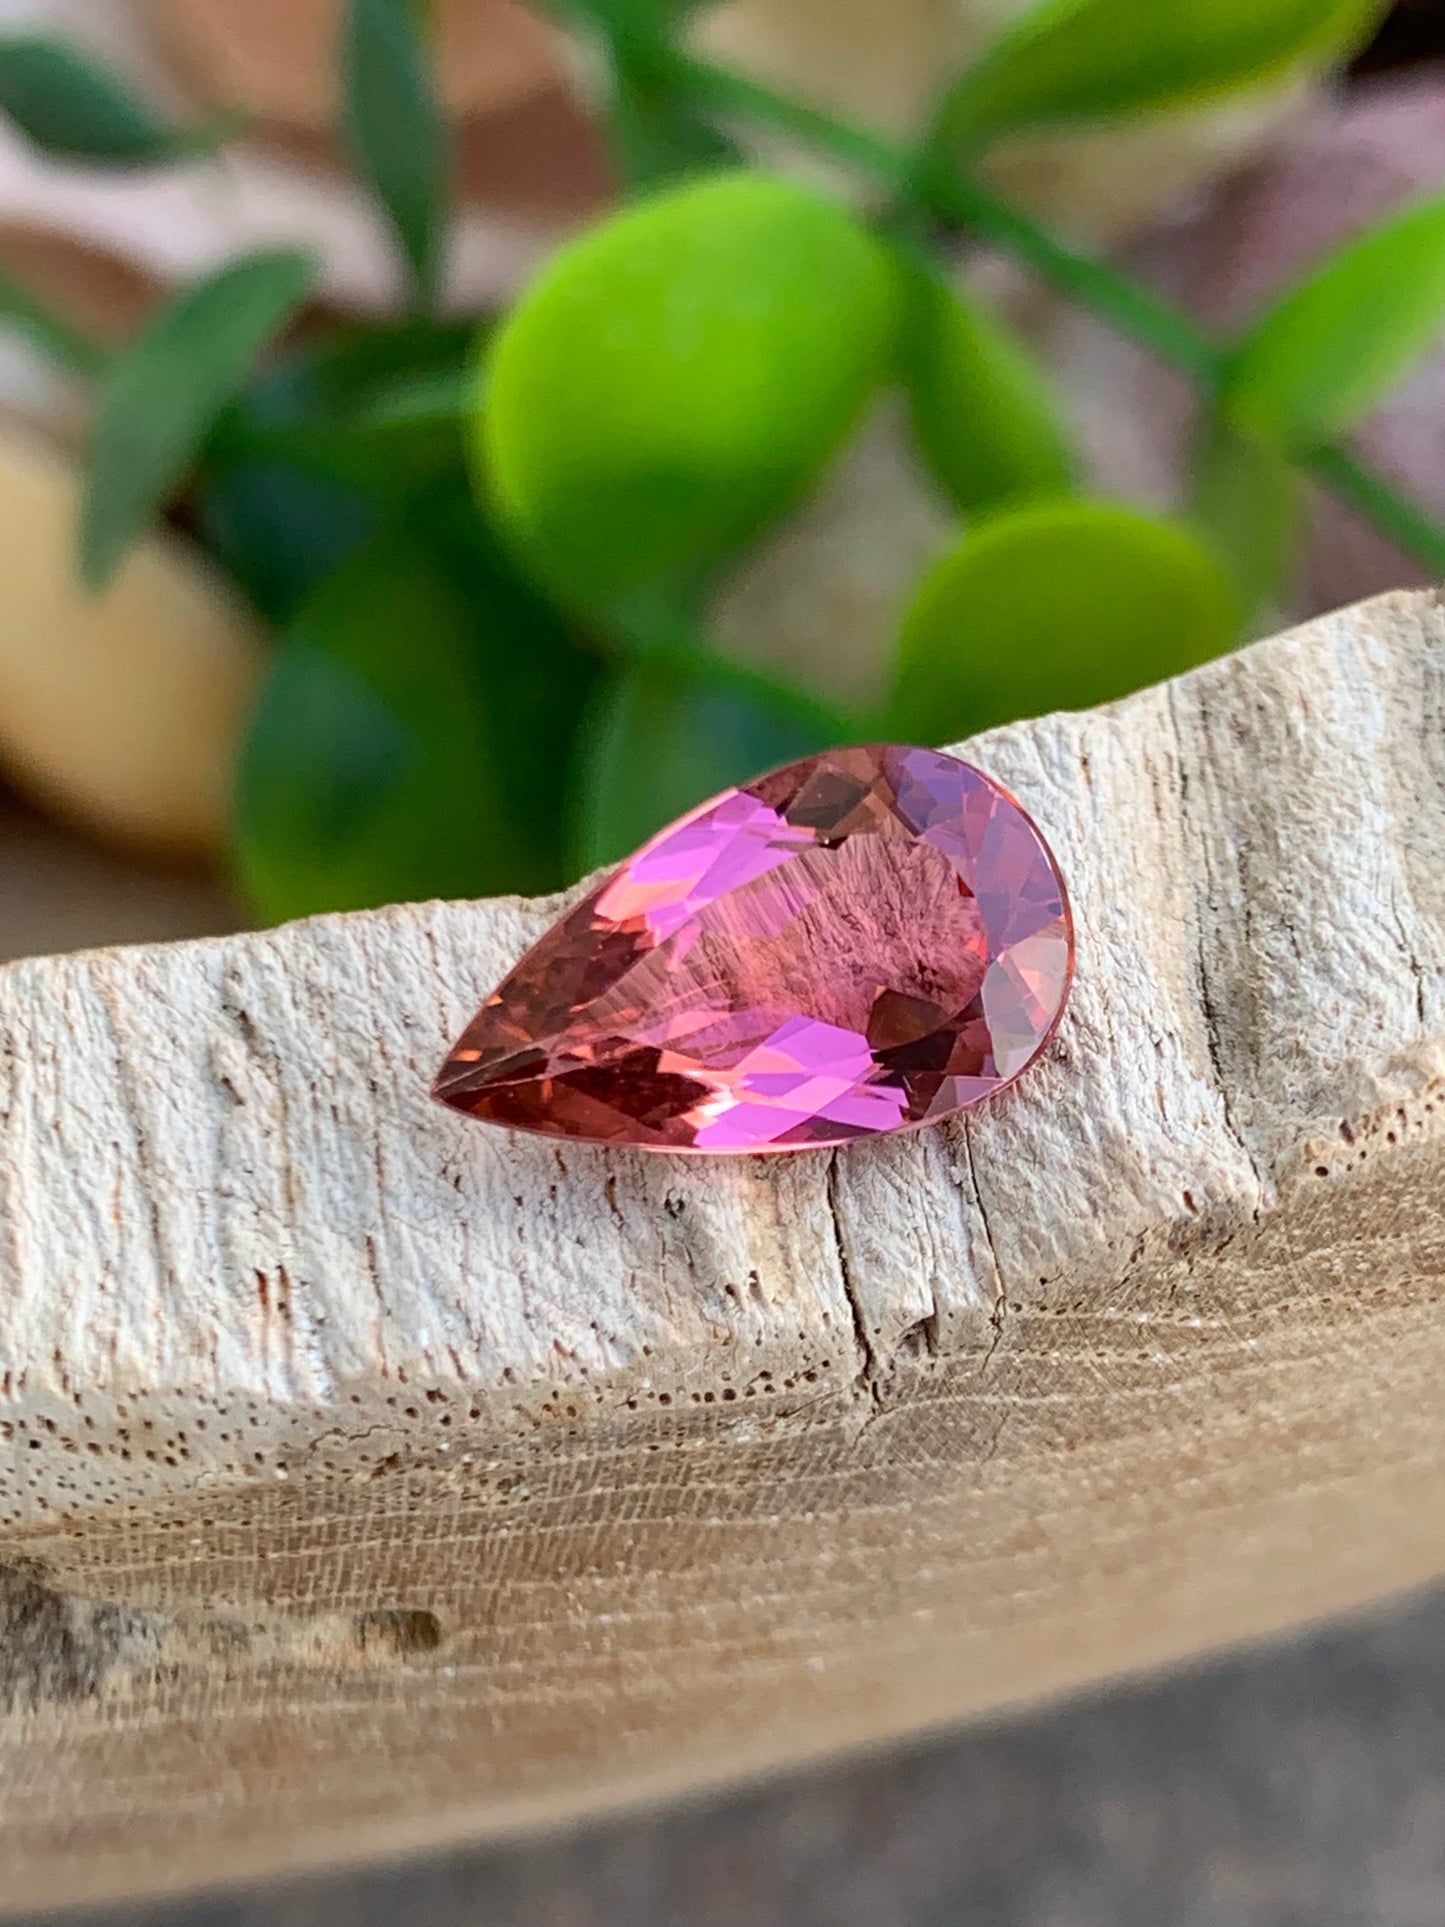 2.51 Carat Natural Pink Tourmaline Pear Cut from Afghanistan – Untreated Gemstone for Elegant Jewelry